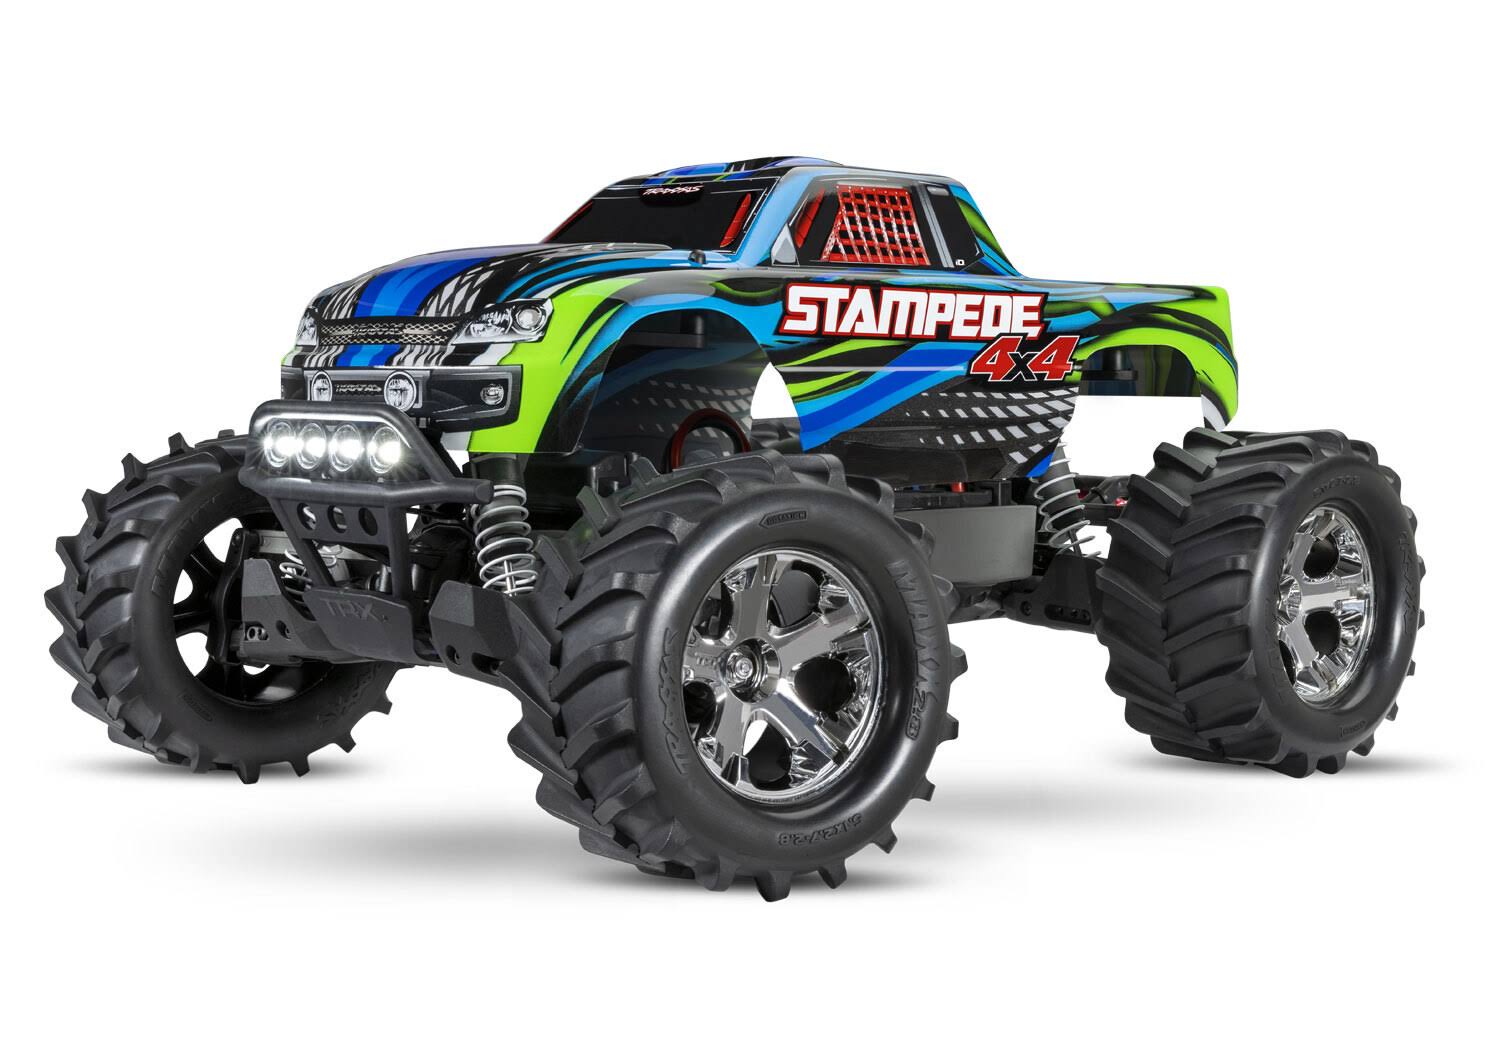 Traxxas Stampede 4x4 1/10 XL-5 Monster Truck with LED Lighting Blue 67054-61 - Default Title